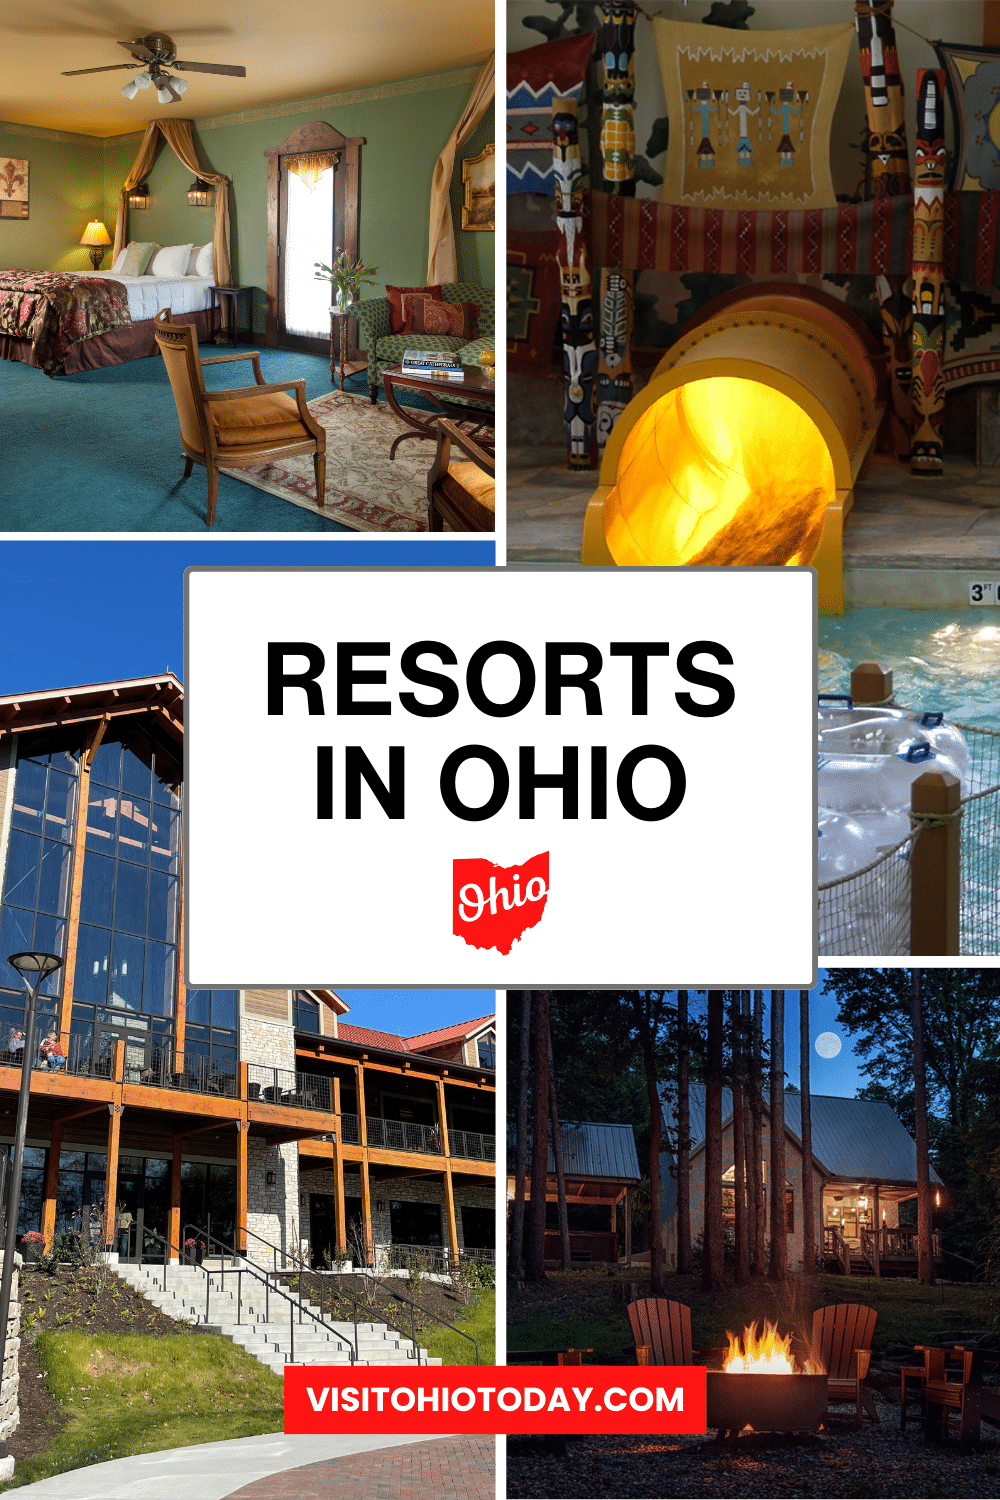 There are a lot of resorts in Ohio, ranging from resorts aimed at kids and family fun to quiet and private adult resorts. In this article we have selected some of the best resorts in Ohio whatever your requirements.